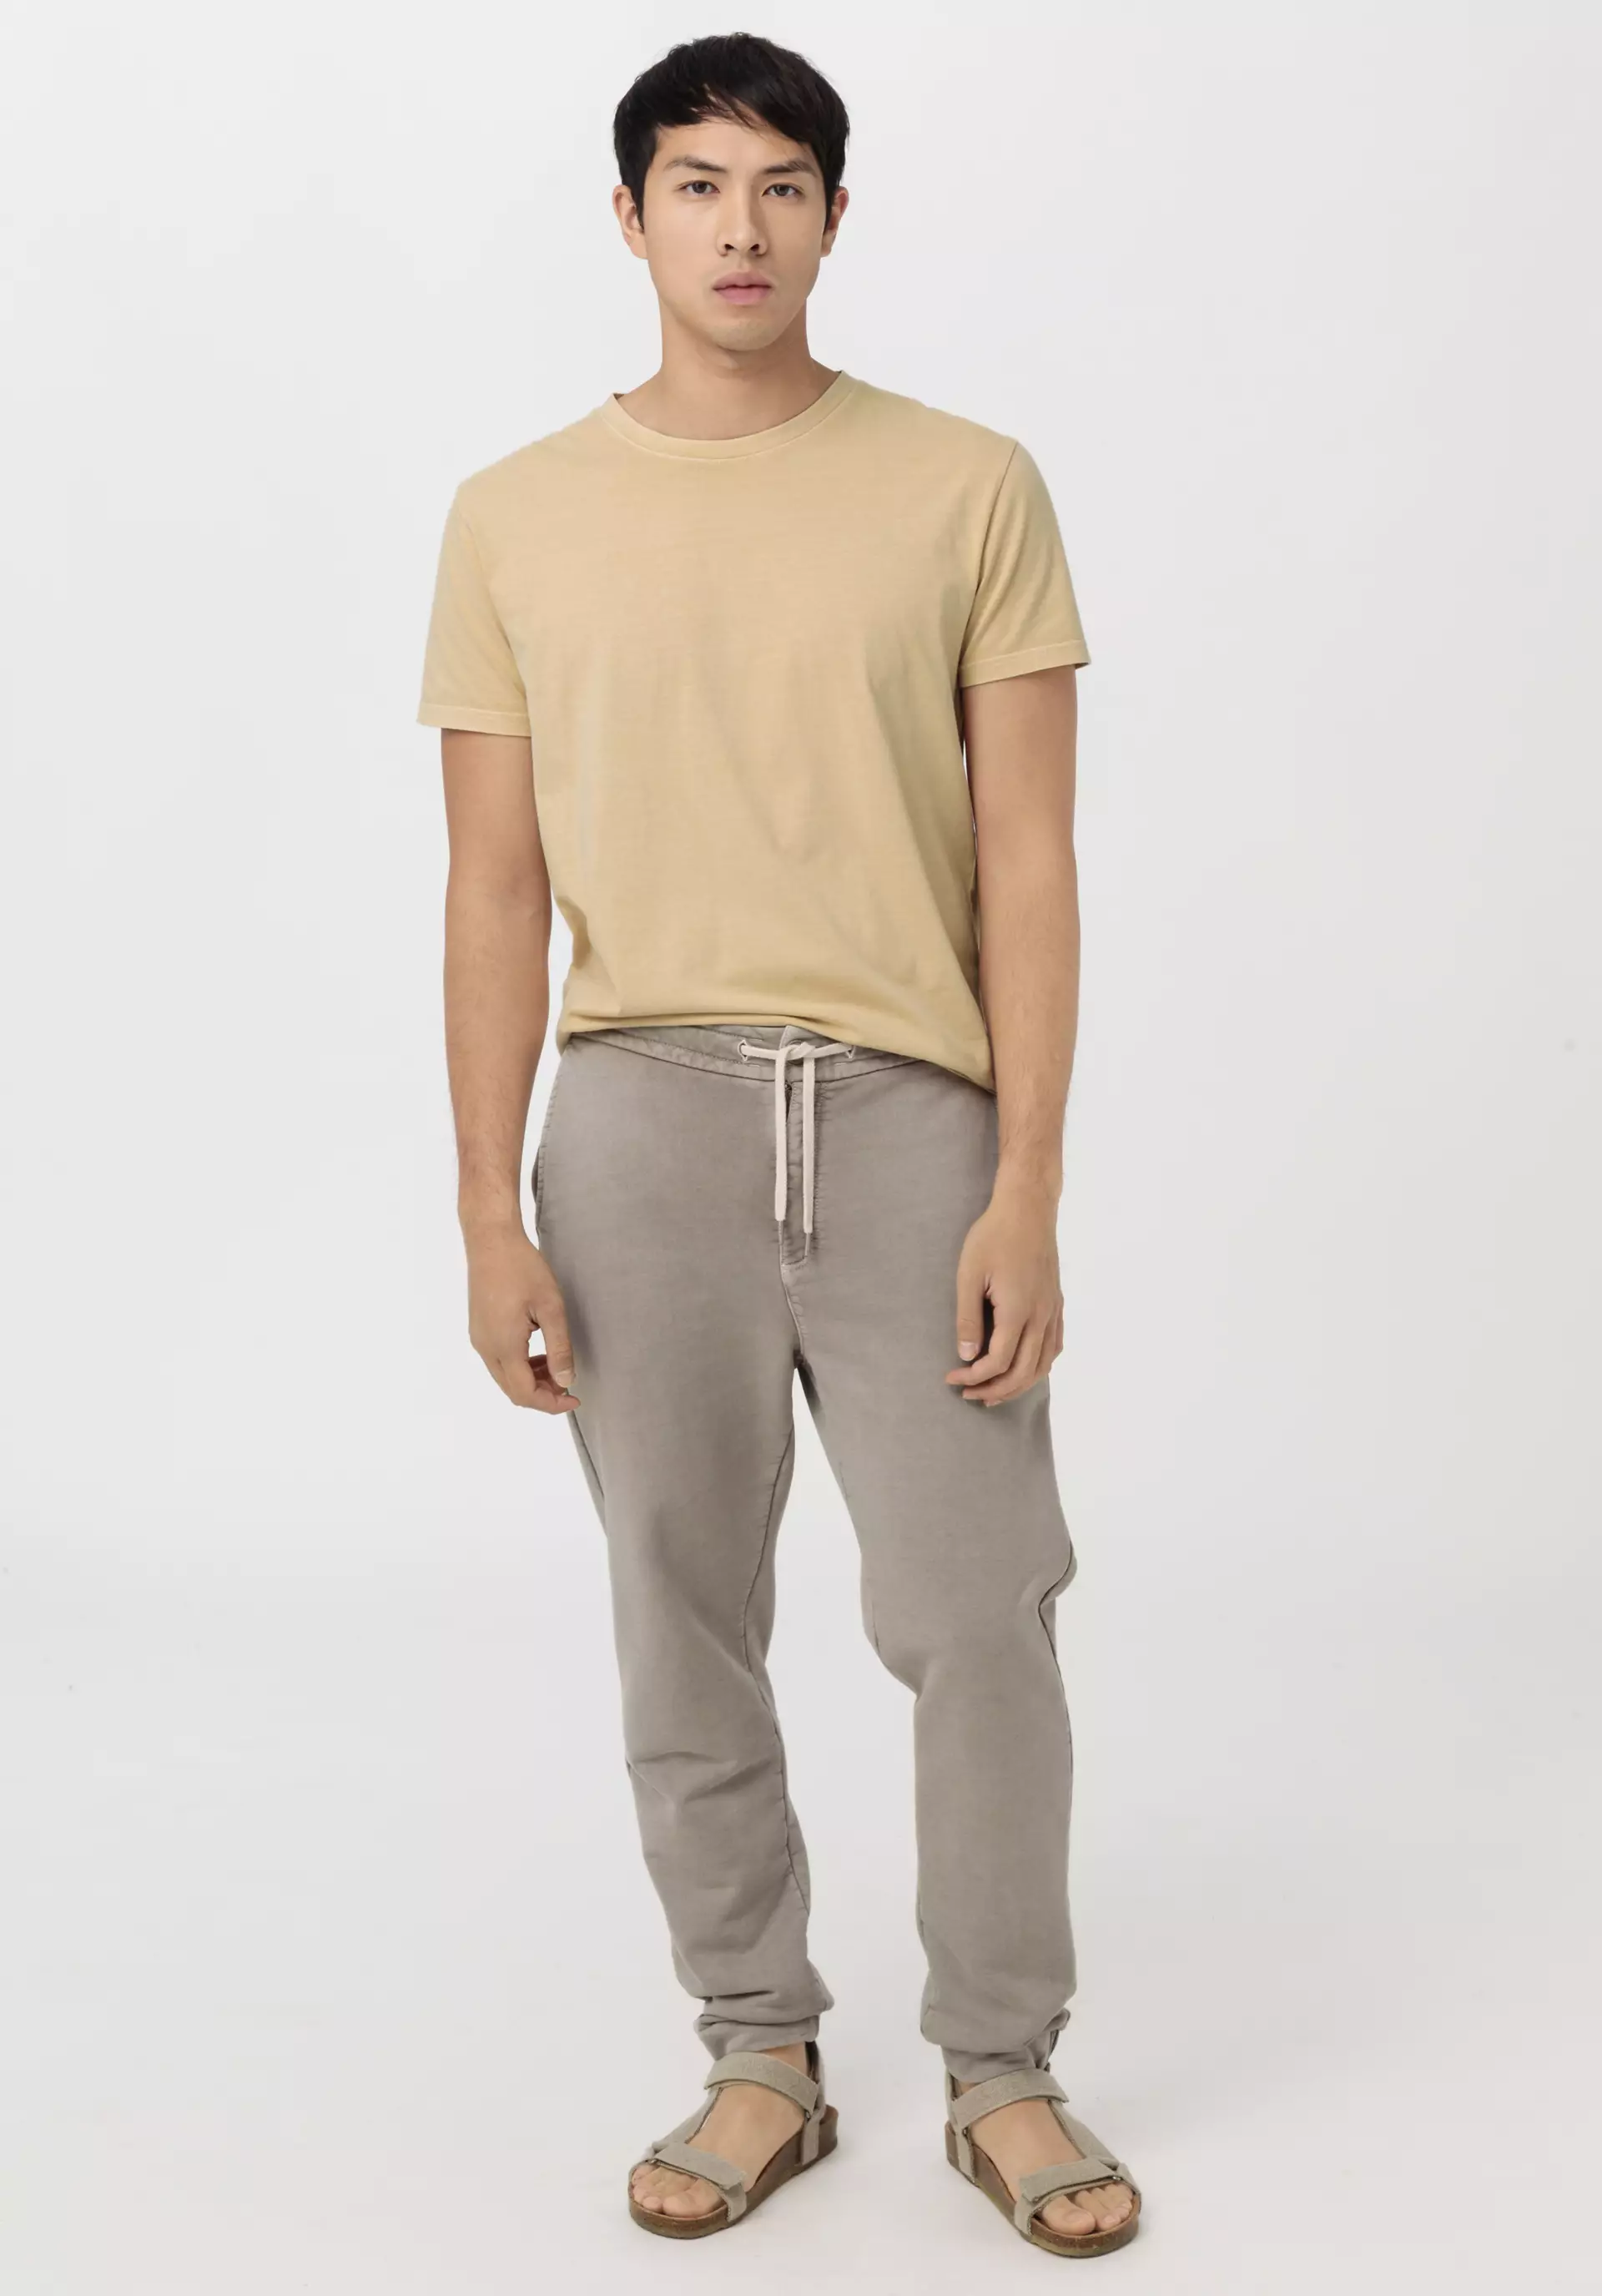 Jogging pants, mineral-dyed, made of pure organic cotton - 1